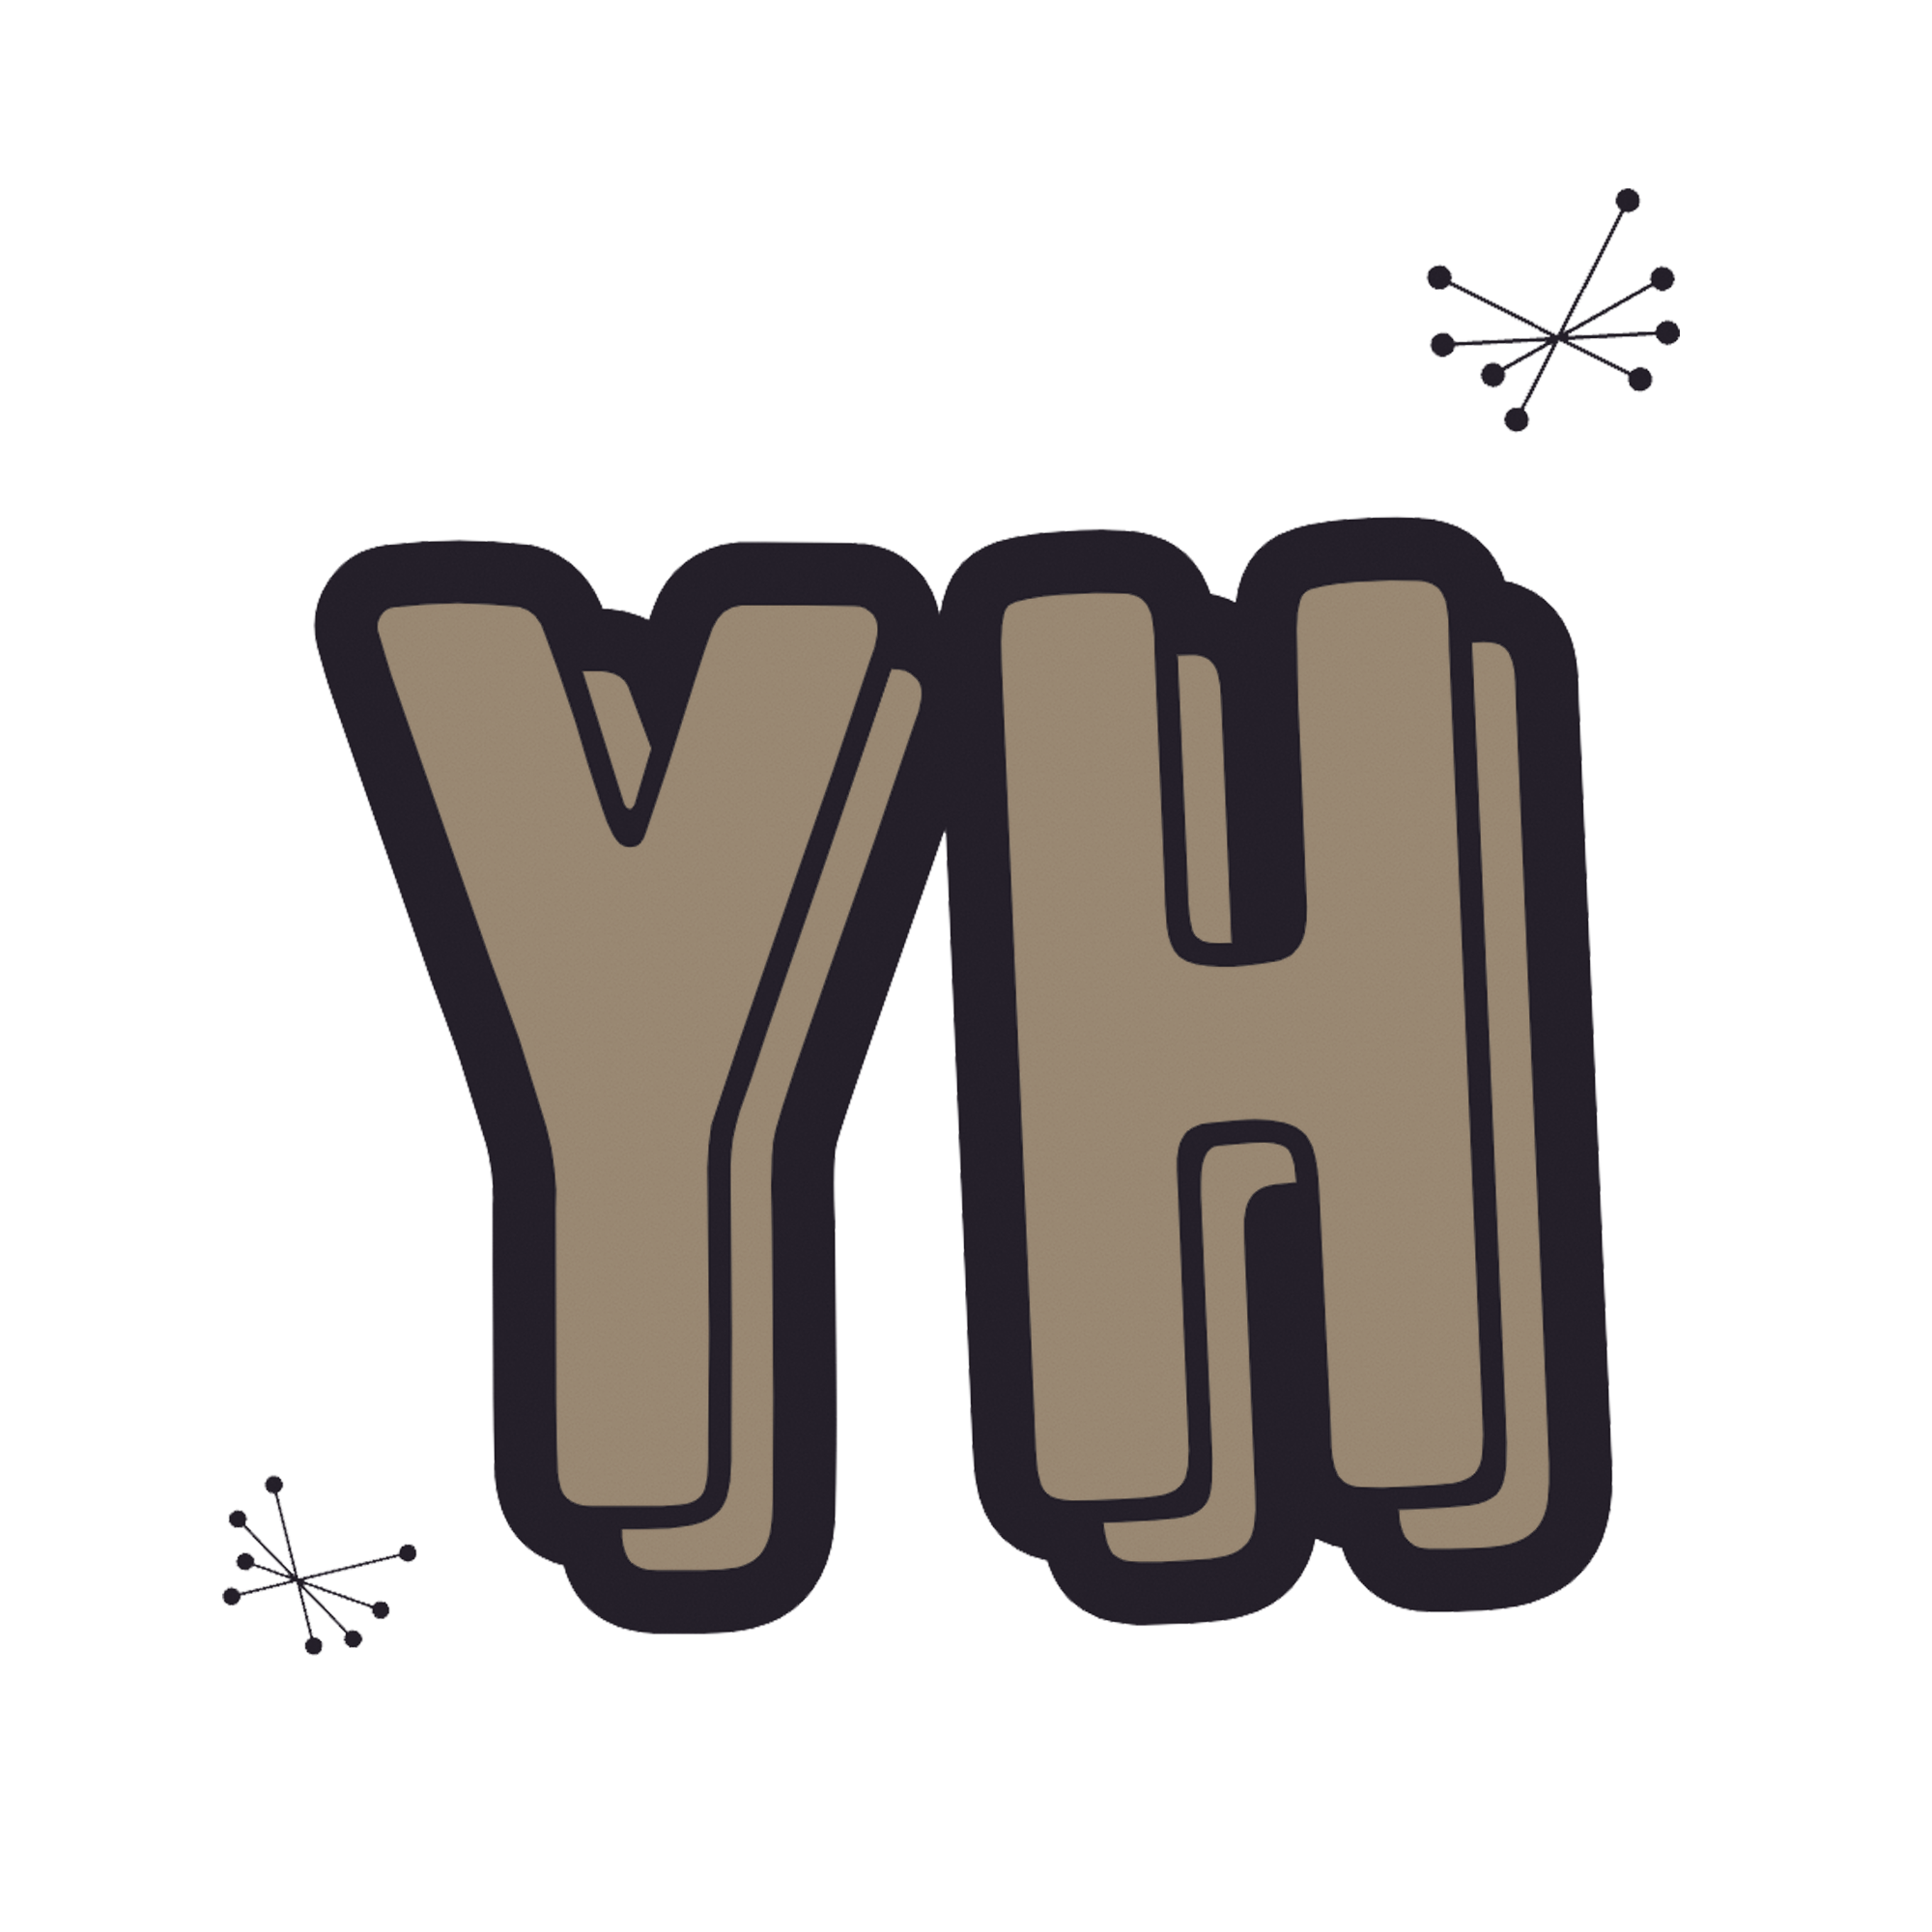 Youndhut